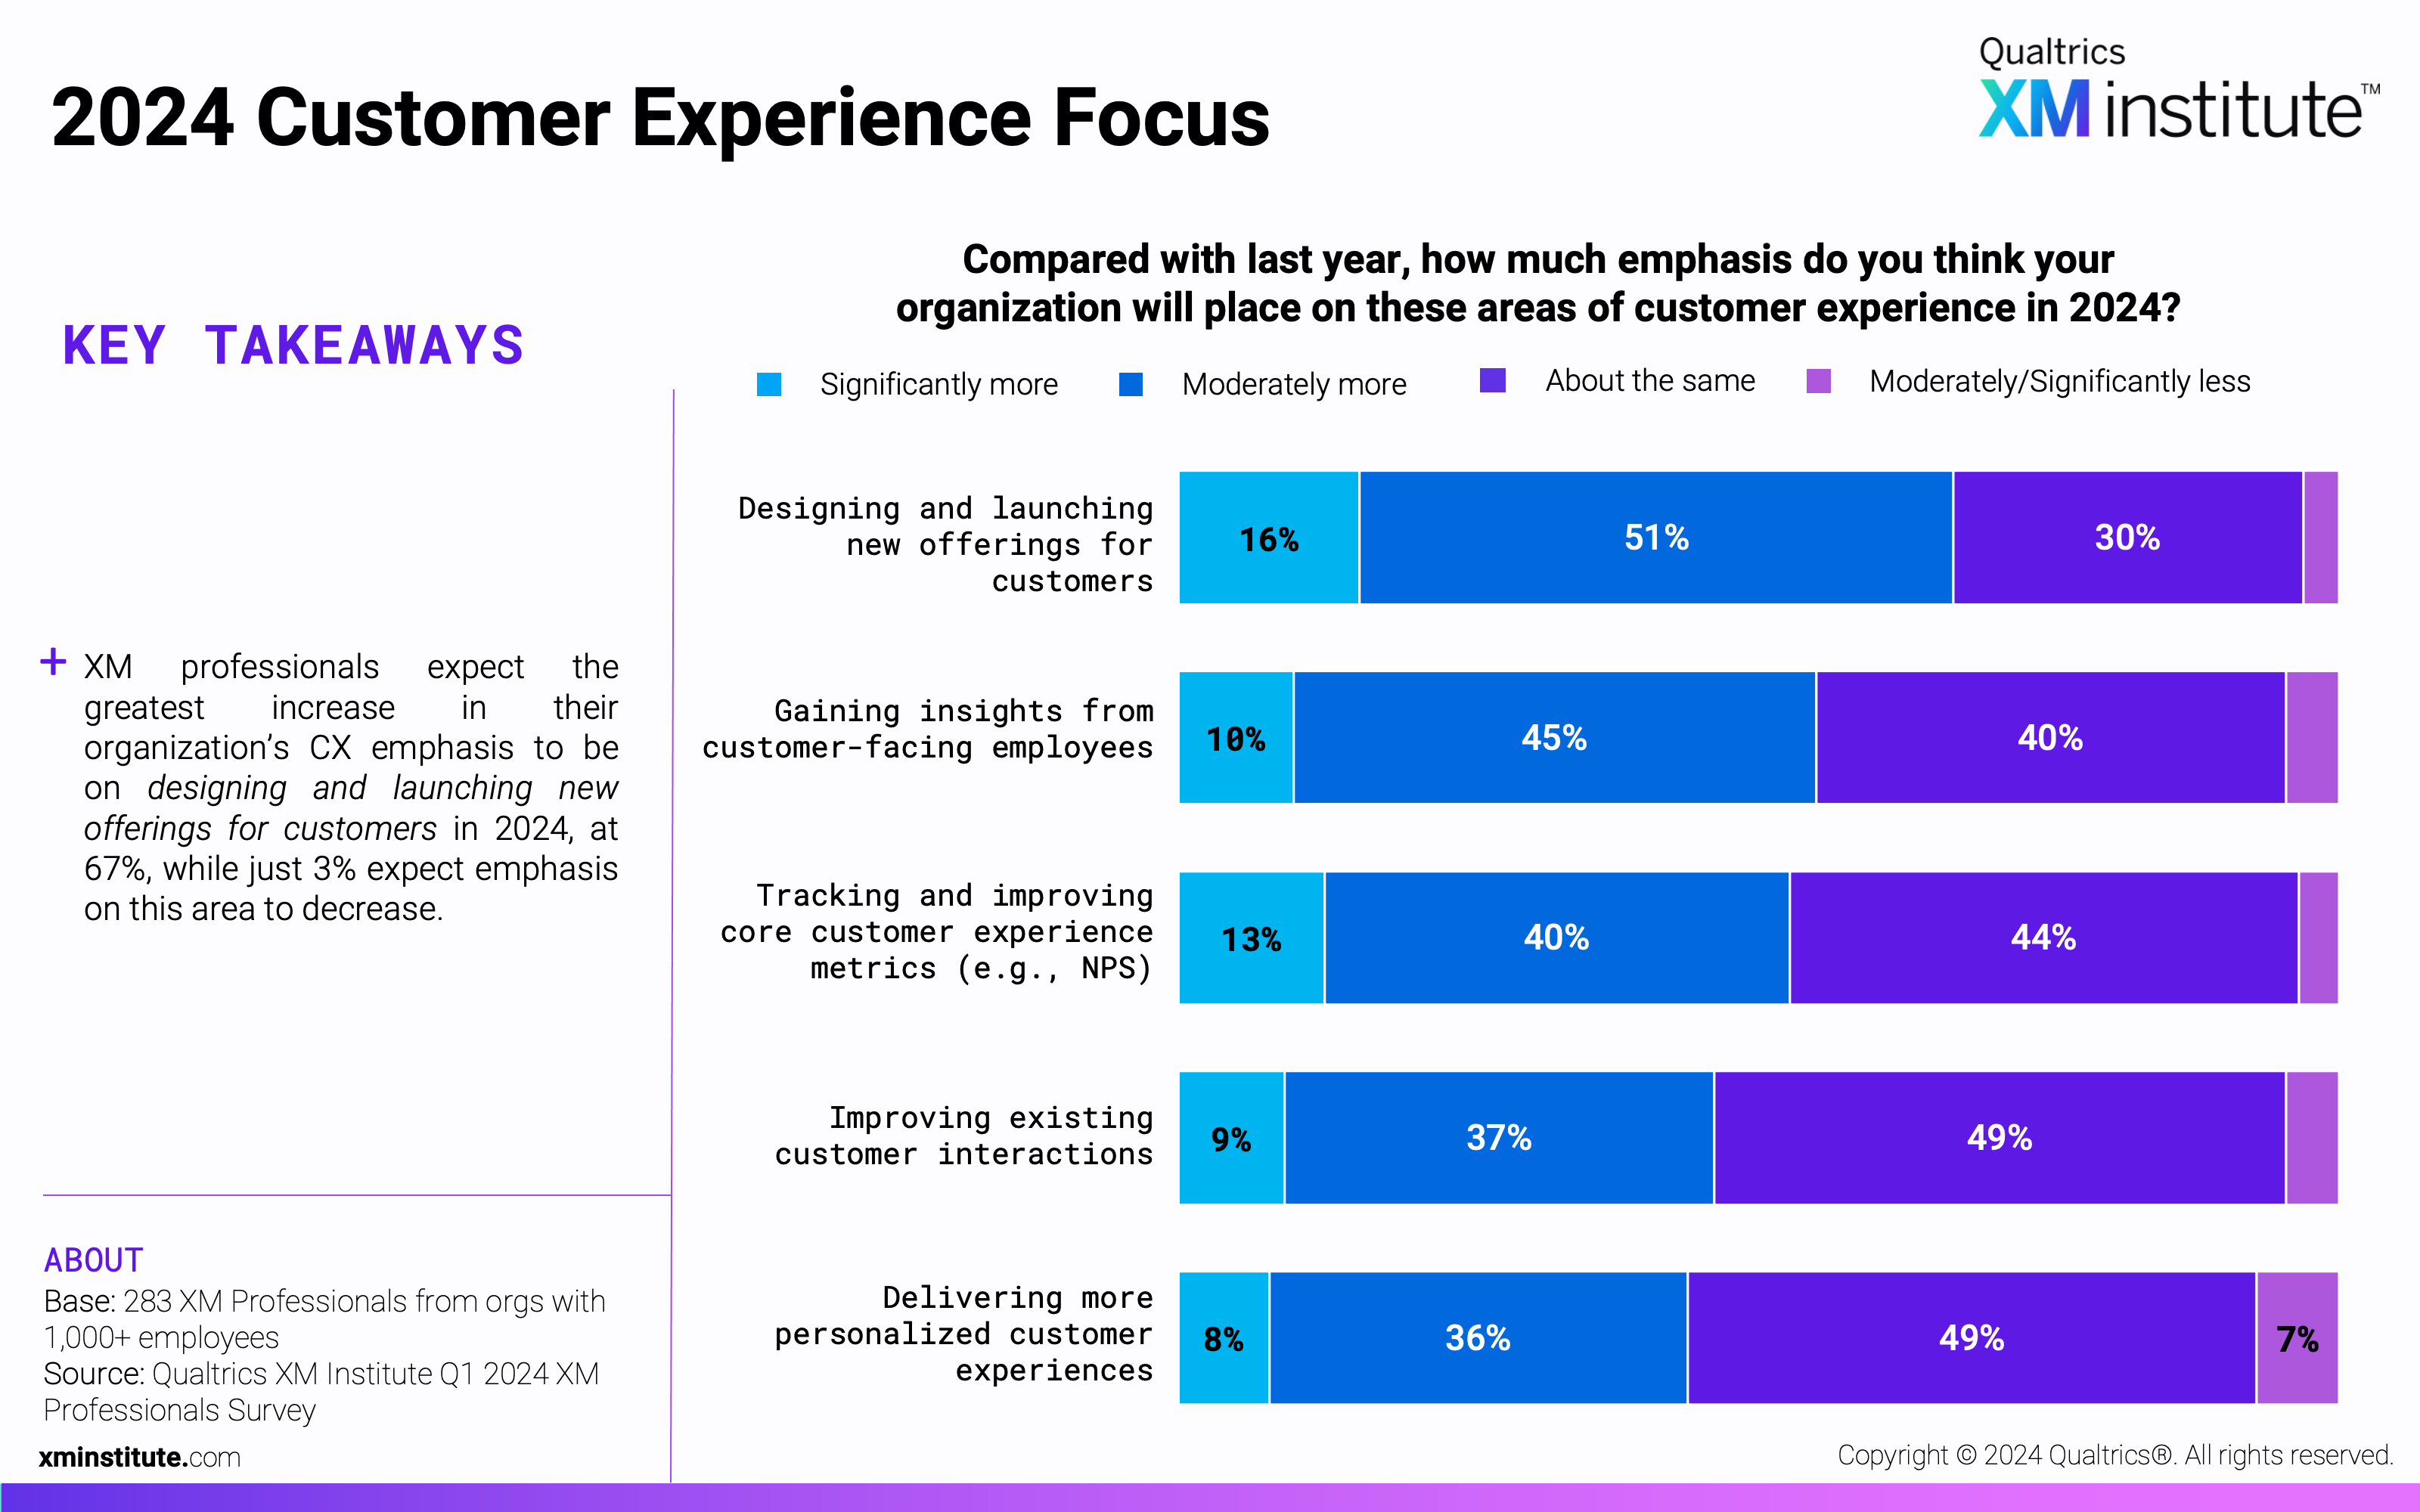 This chart shows how much more emphasis respondents think their organization will place on 5 areas of CX in 2024 compared to in 2023. 